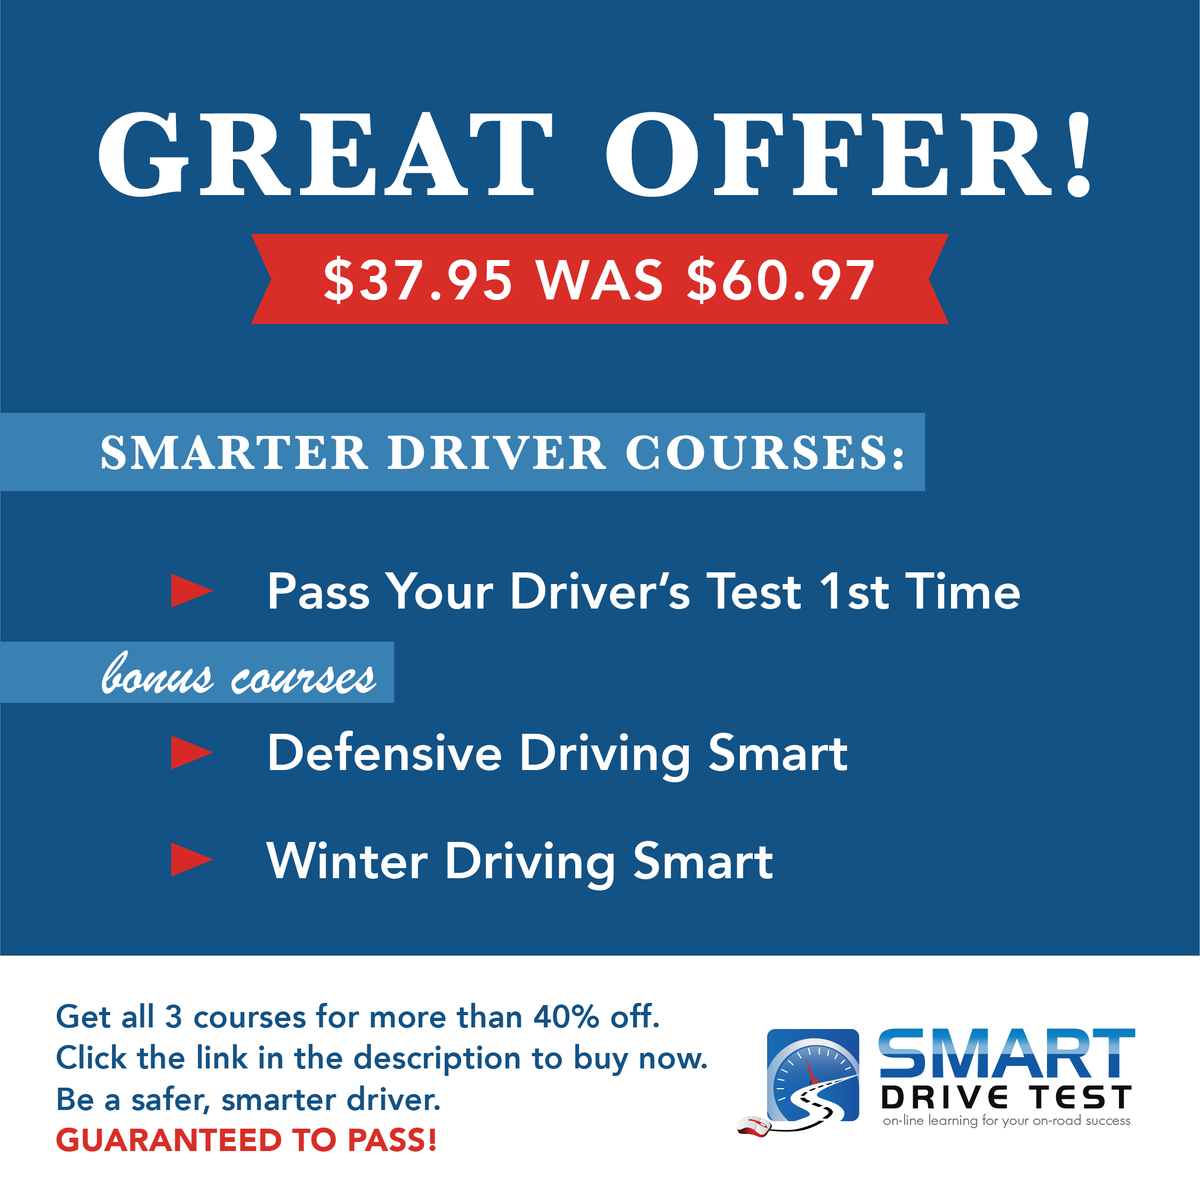 DON'T FAIL YOUR DRIVER'S TEST COURSE PKG
smartdrivetest.com/new-drivers/sm…
We include as a bonus both the winter and defensive driving in the above course package.

#driving #drivingschool #drivingtest #drivingtestsuccess #drivingtestpassed #drivinglessons #drivingtesttips